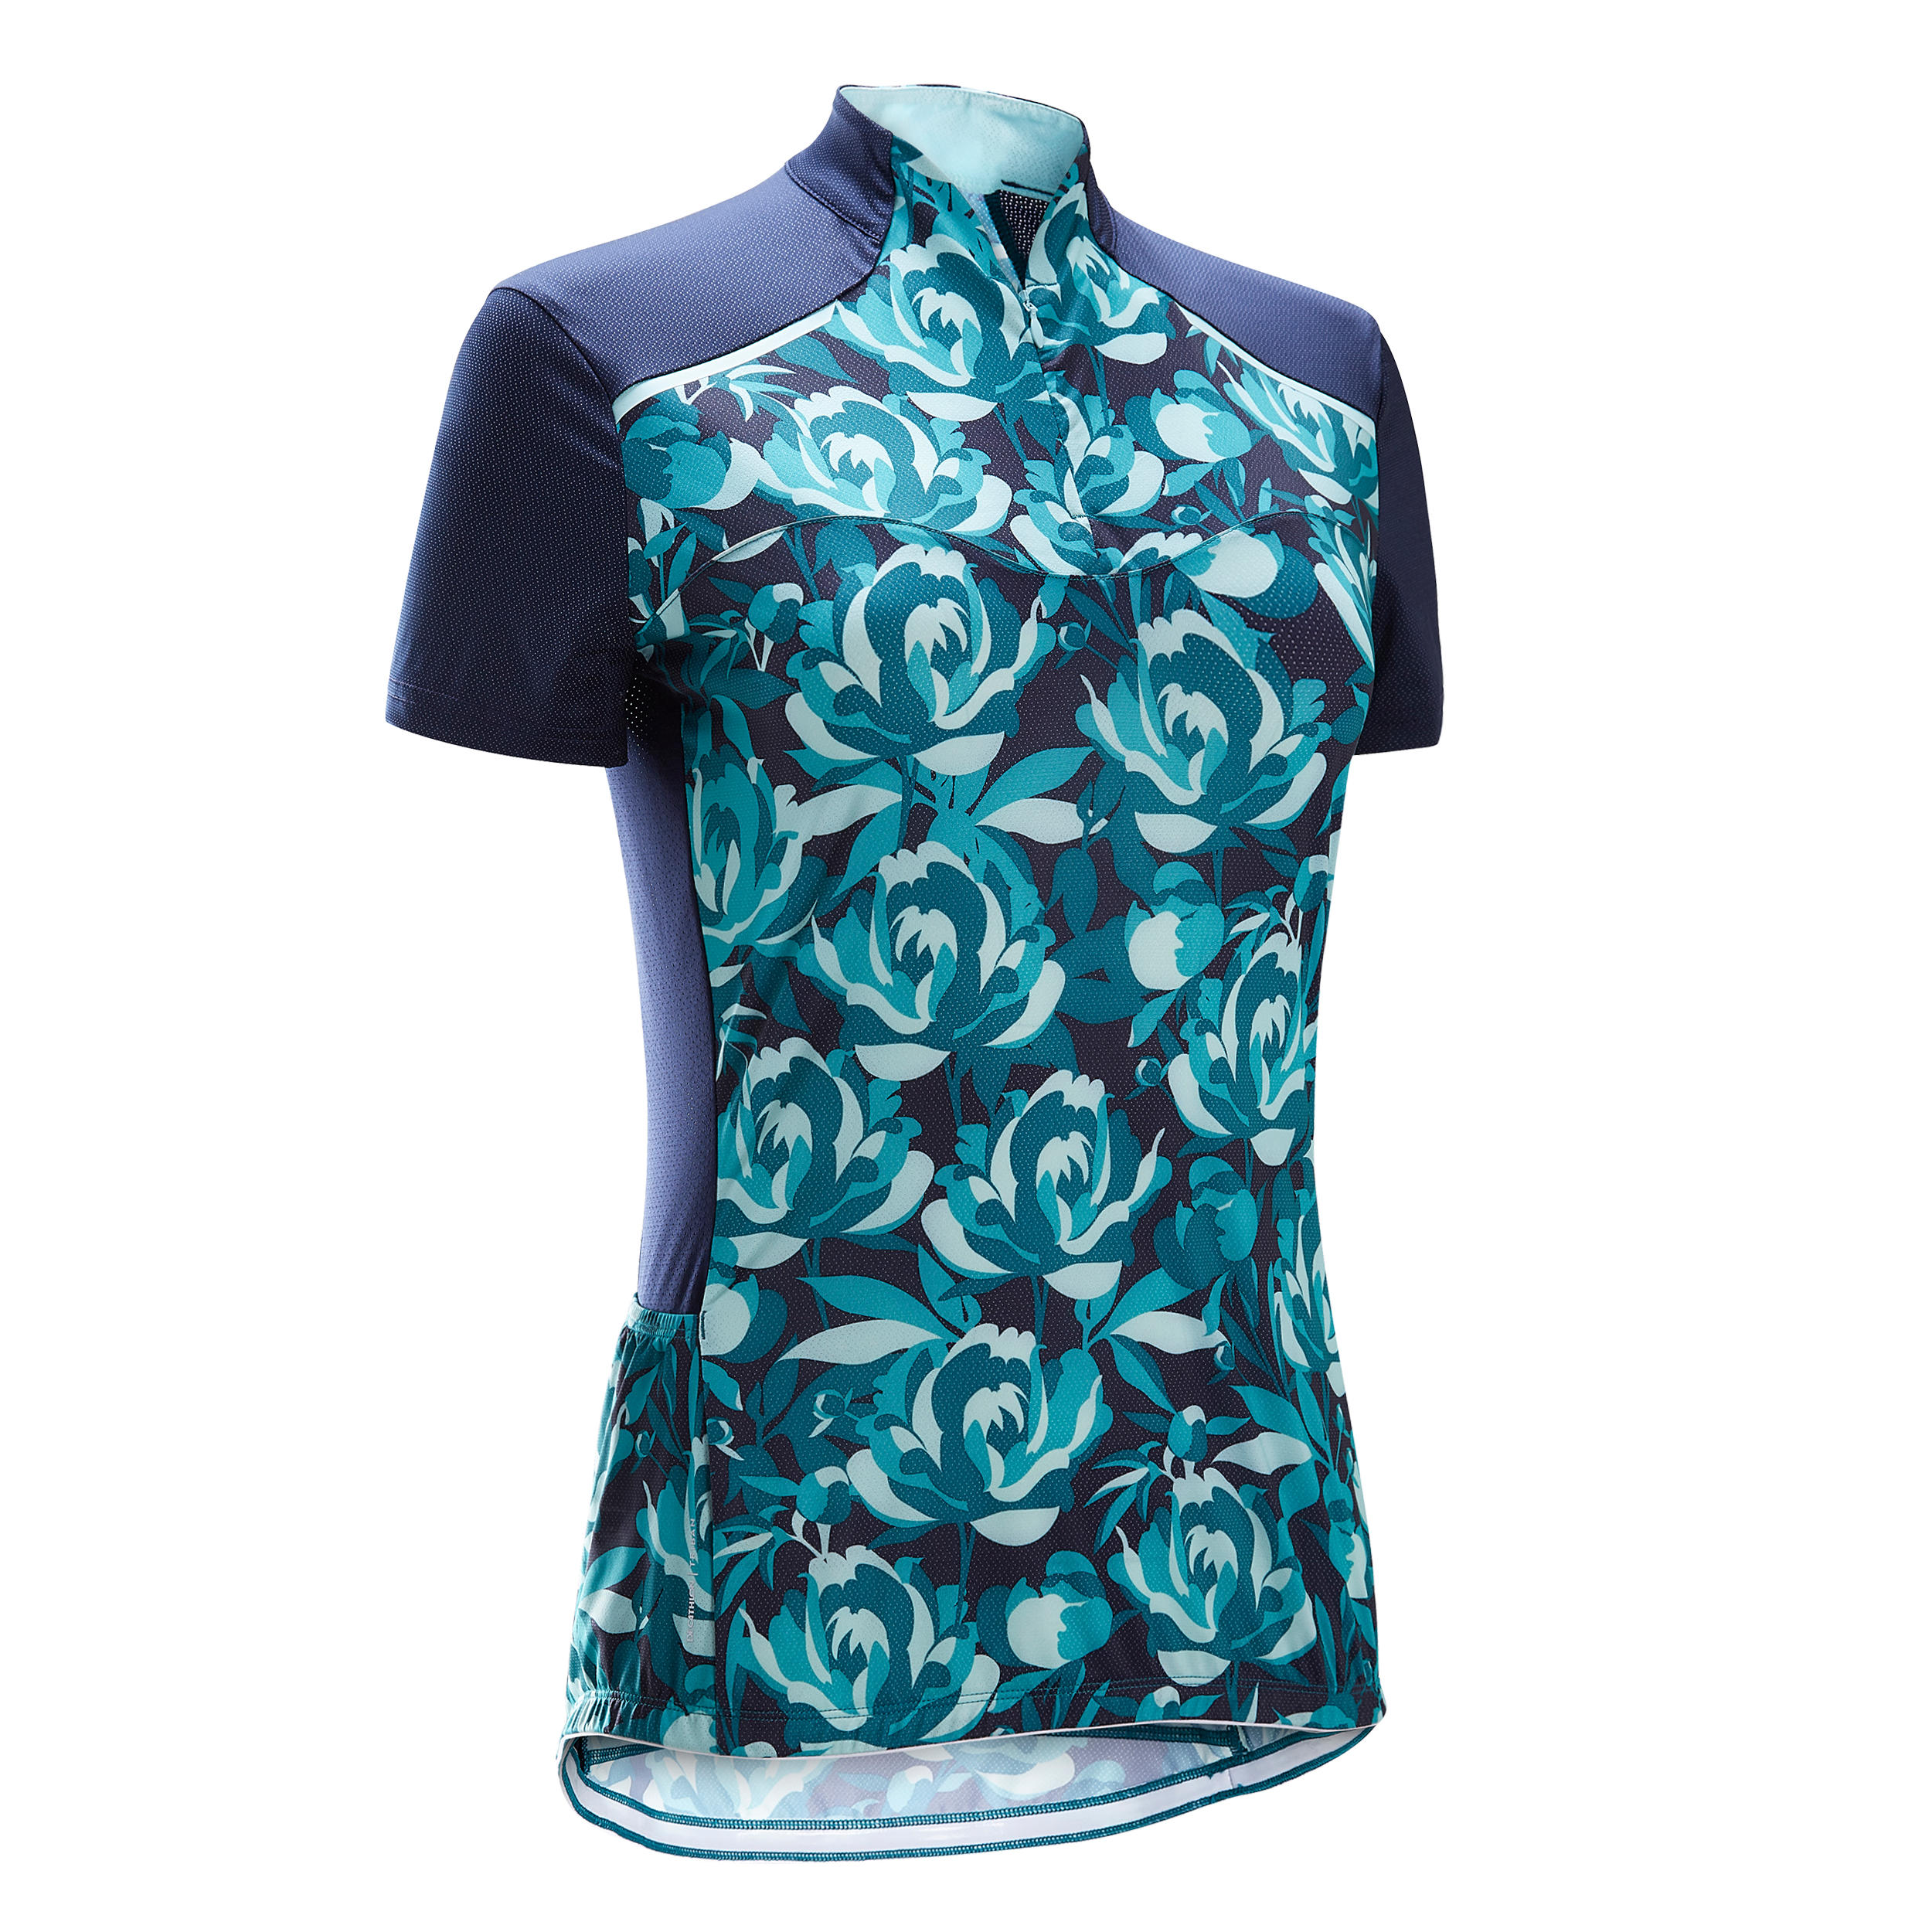 TRIBAN Women's Short-Sleeved Cycling Jersey 500 - Floral Green 